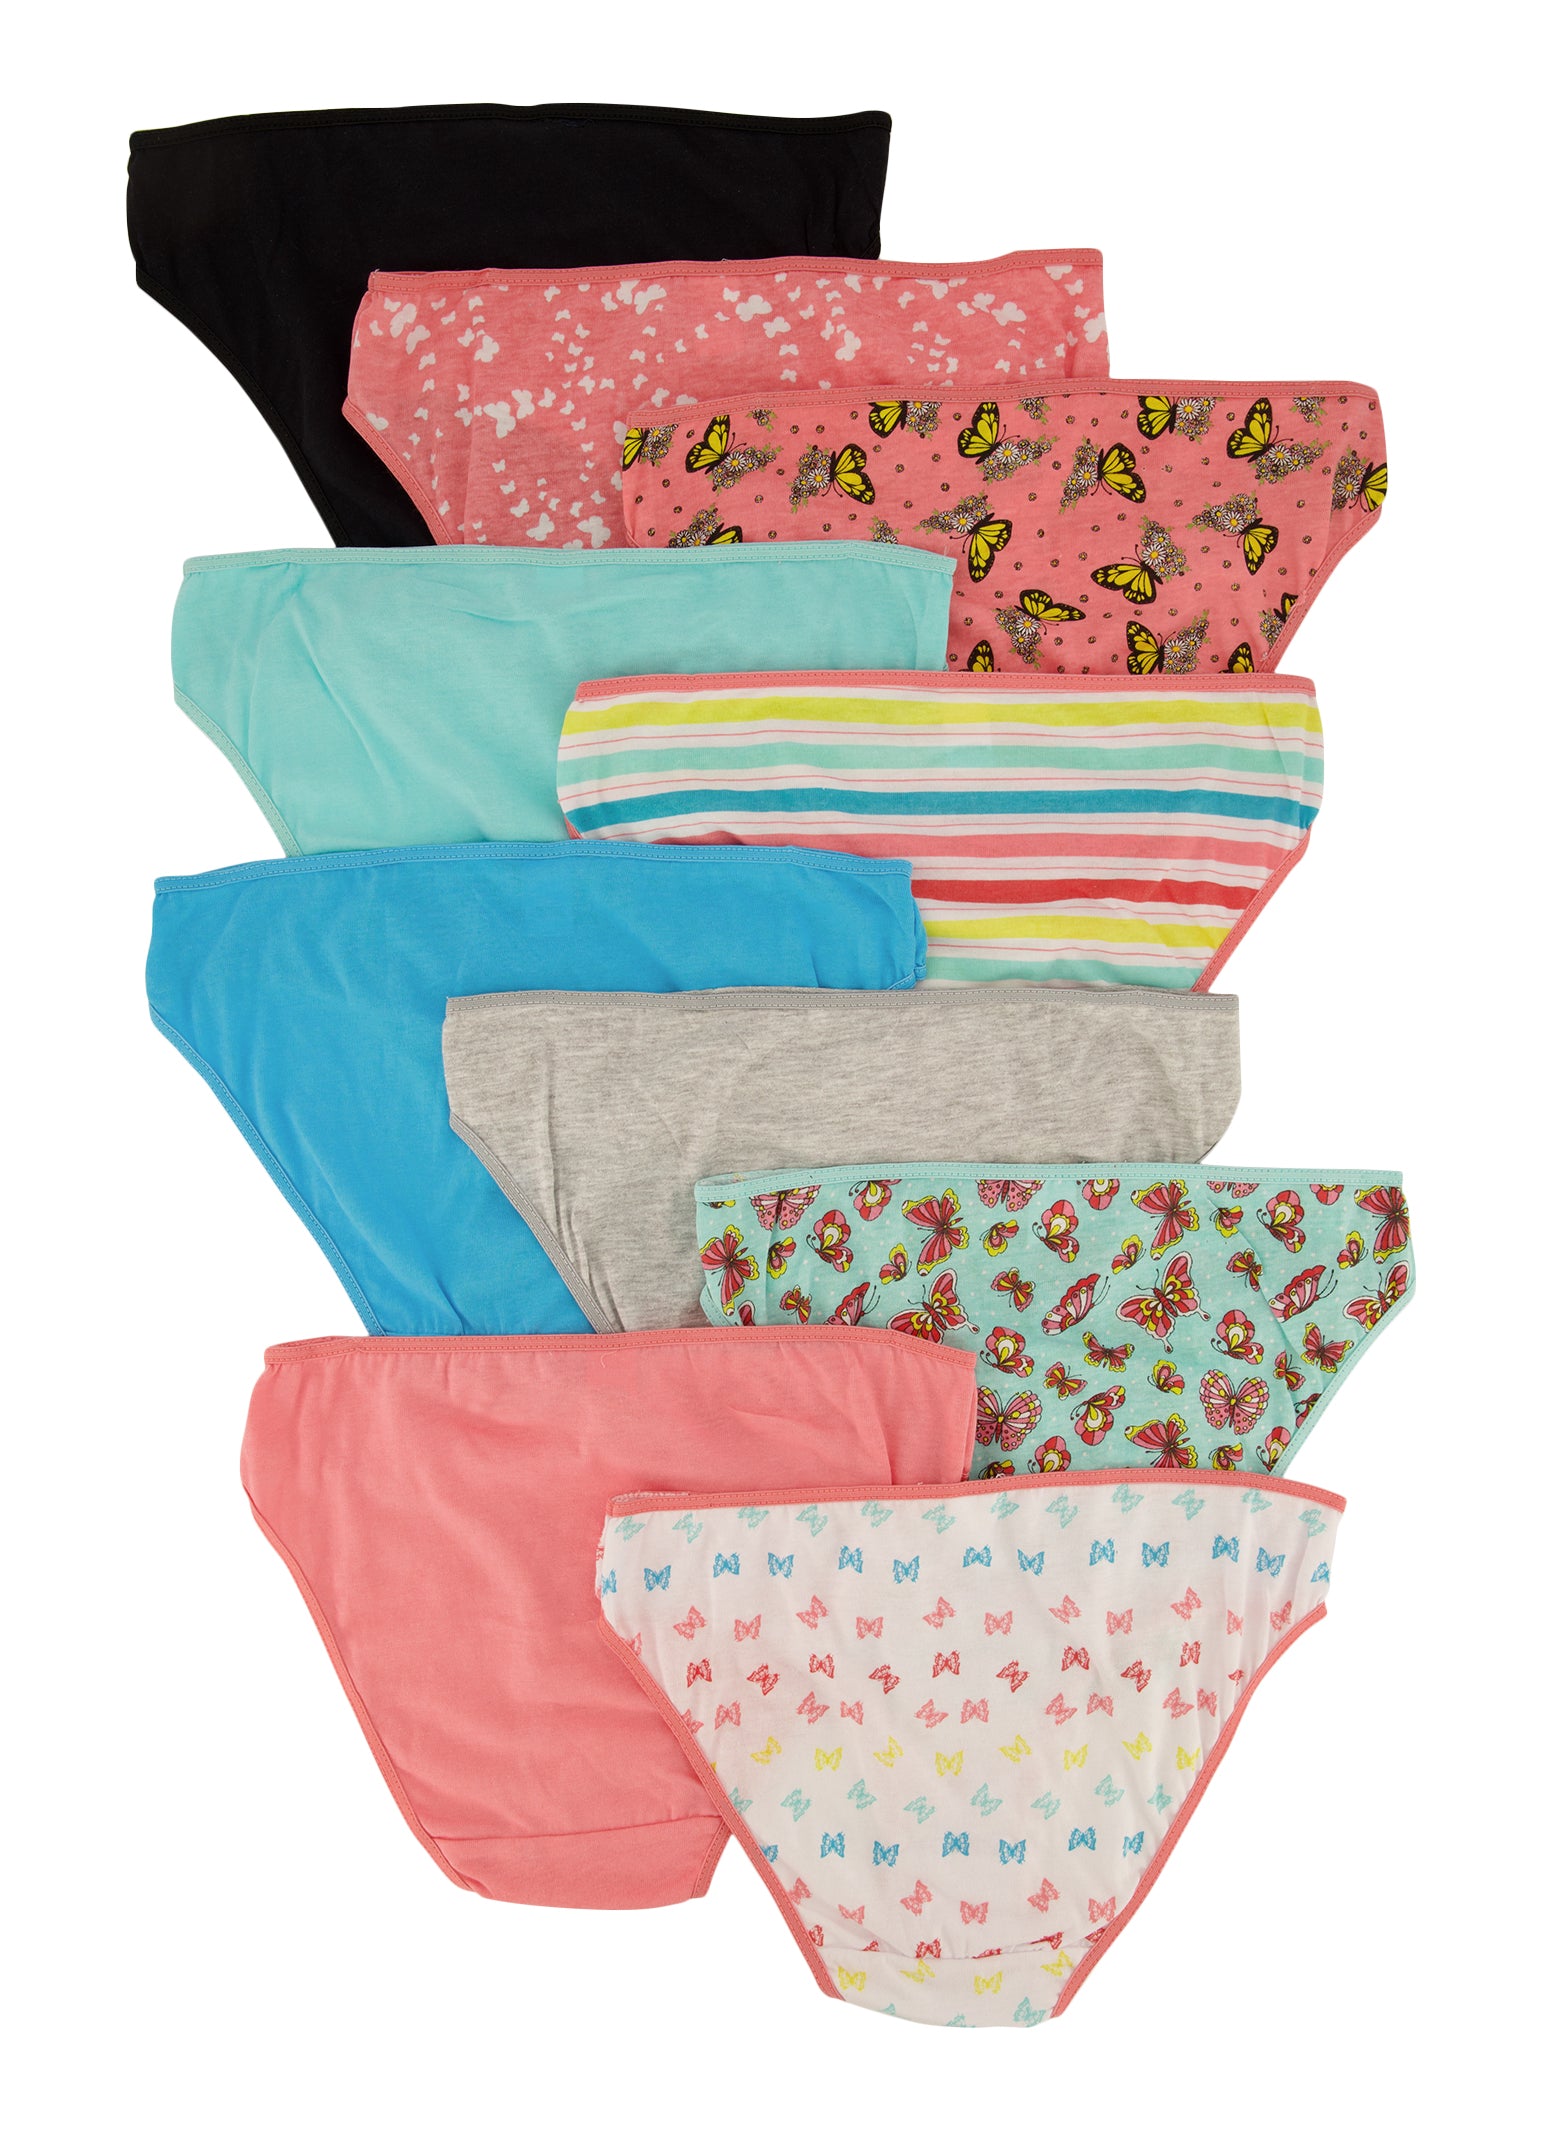 Girls Set of 10 Assorted Butterfly Print Panties - Multi Color